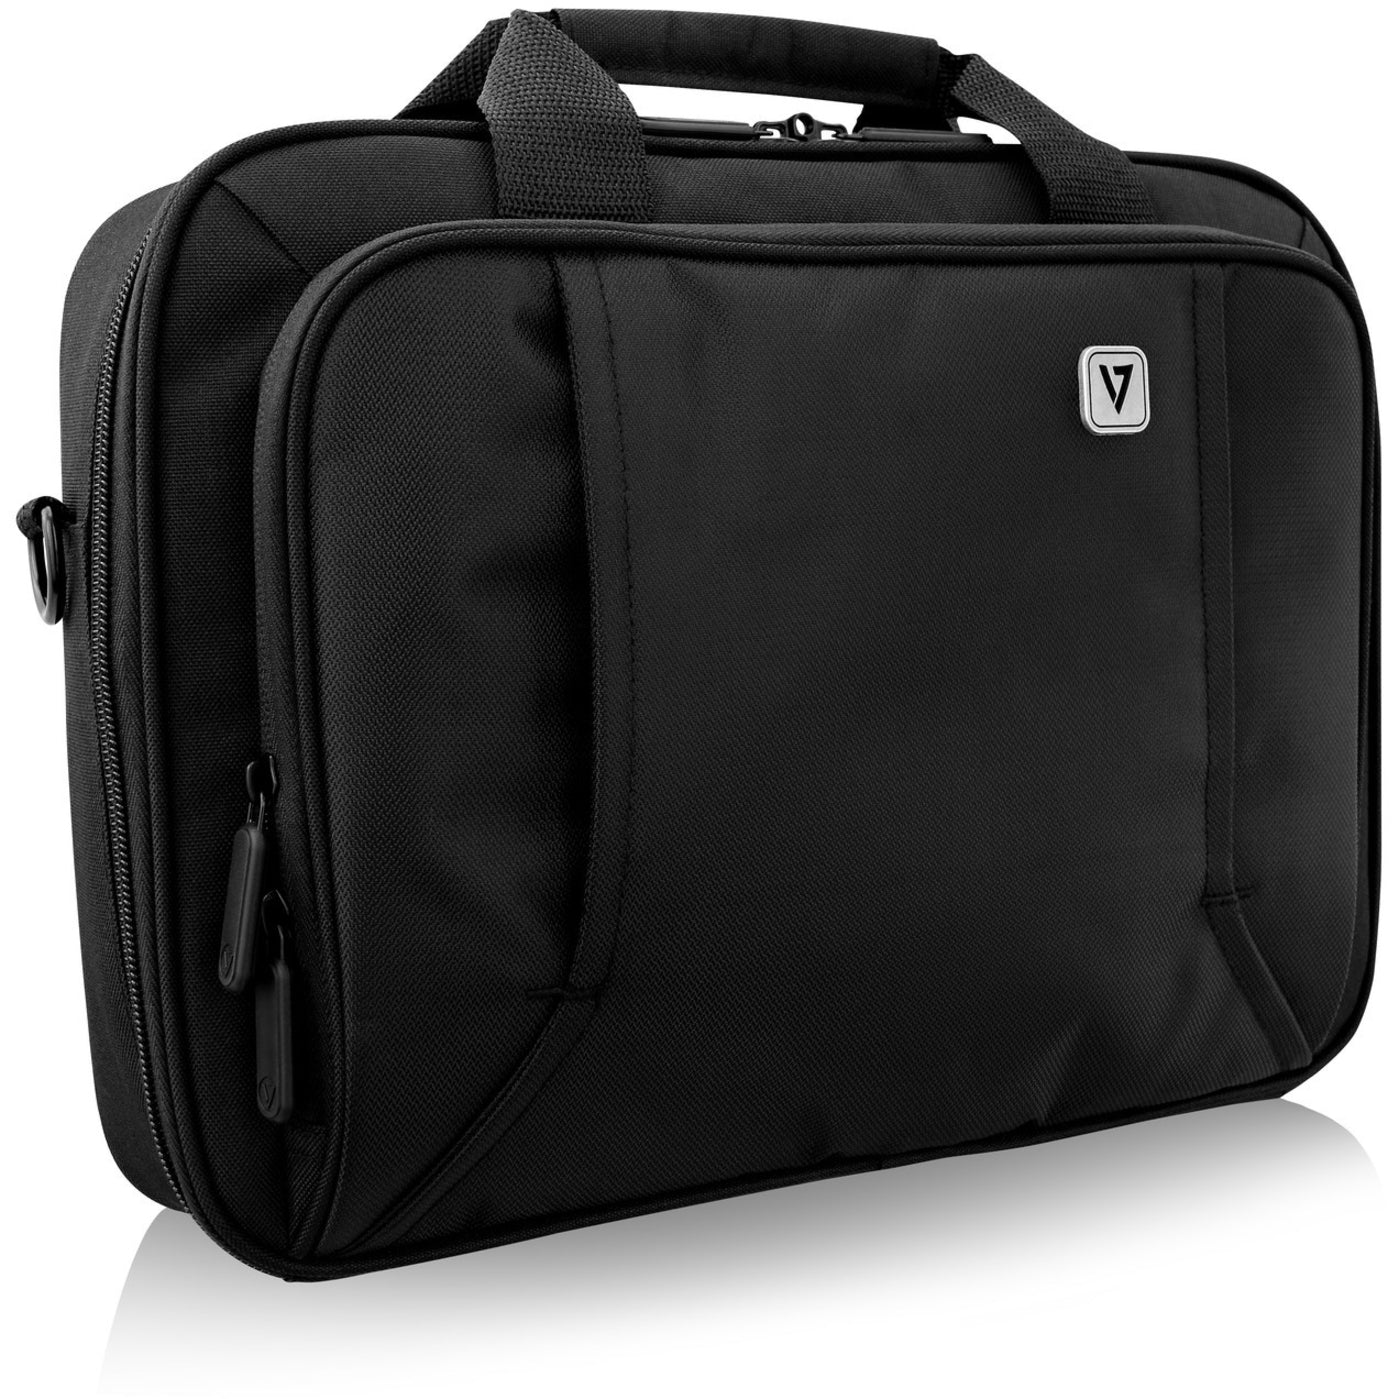 V7 Professional CCP13-BLK-9N Carrying Case (Briefcase) for 13.3" ... - Black